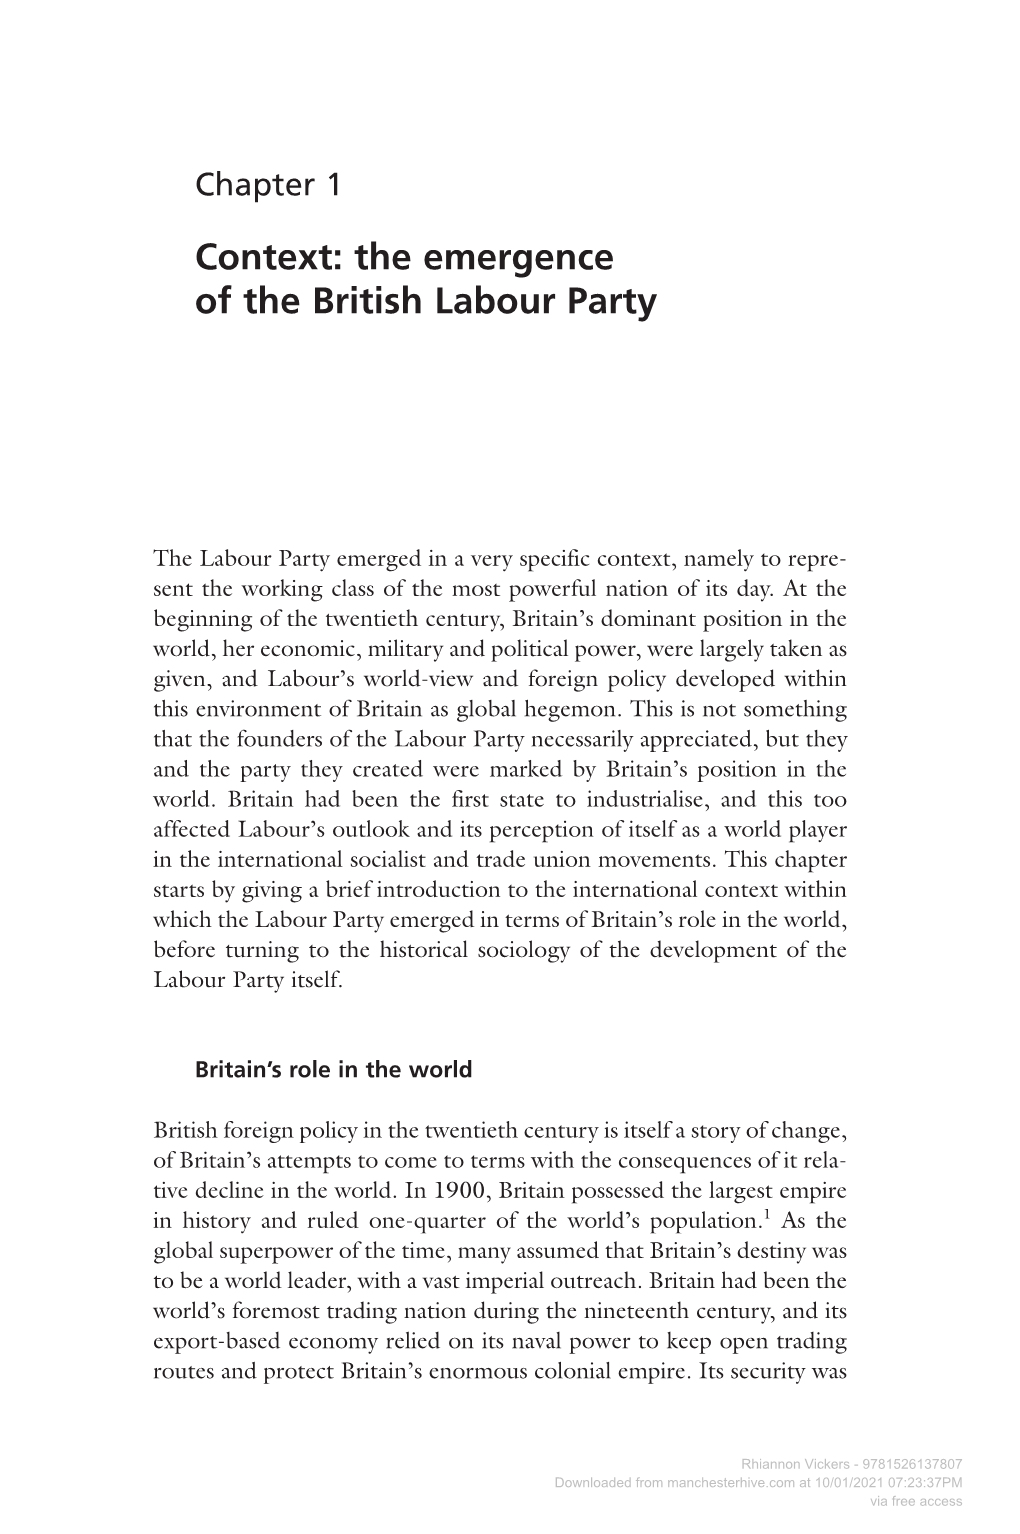 Context: the Emergence of the British Labour Party